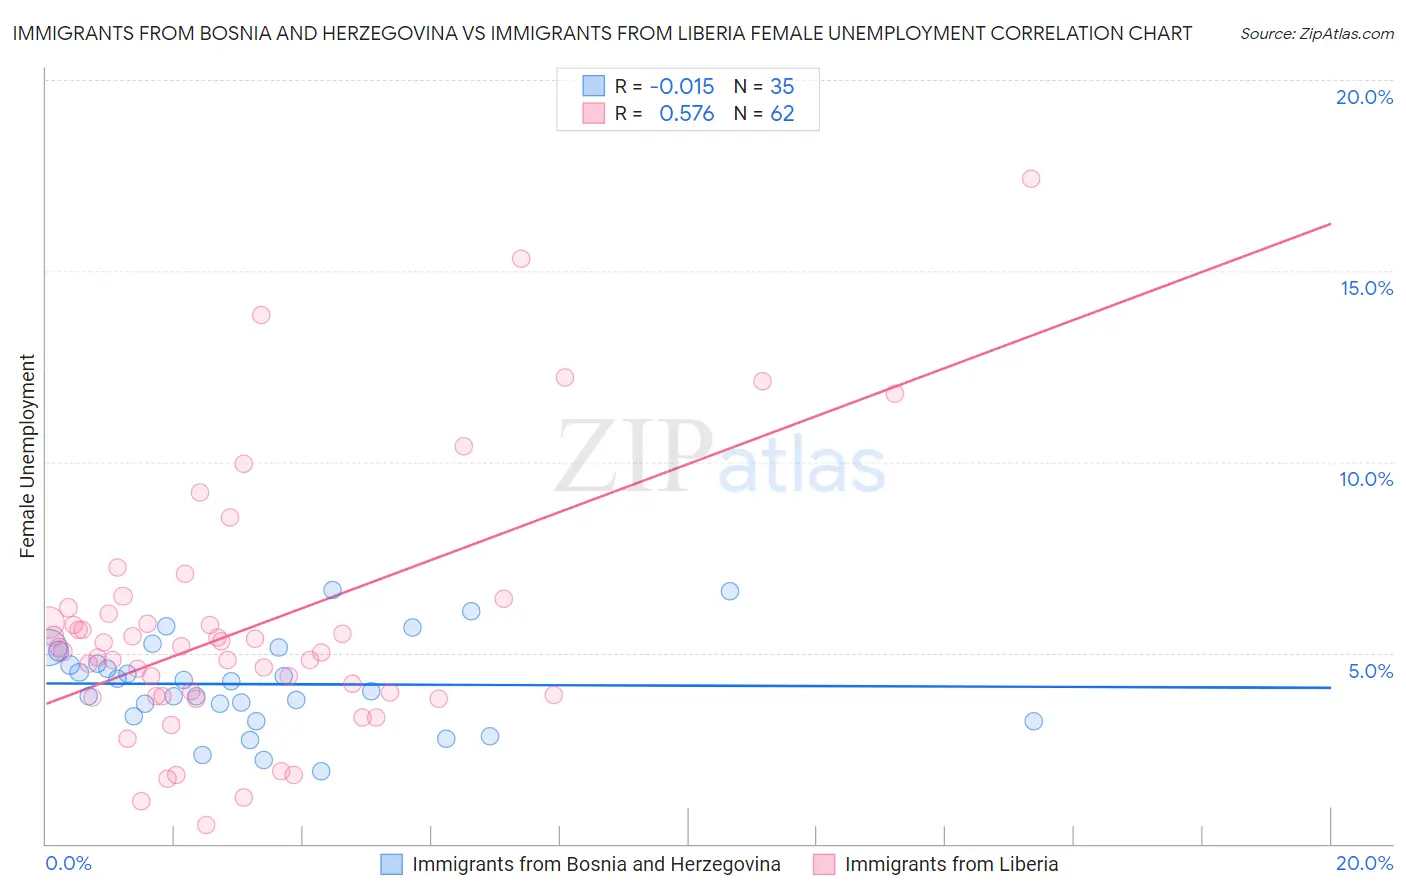 Immigrants from Bosnia and Herzegovina vs Immigrants from Liberia Female Unemployment